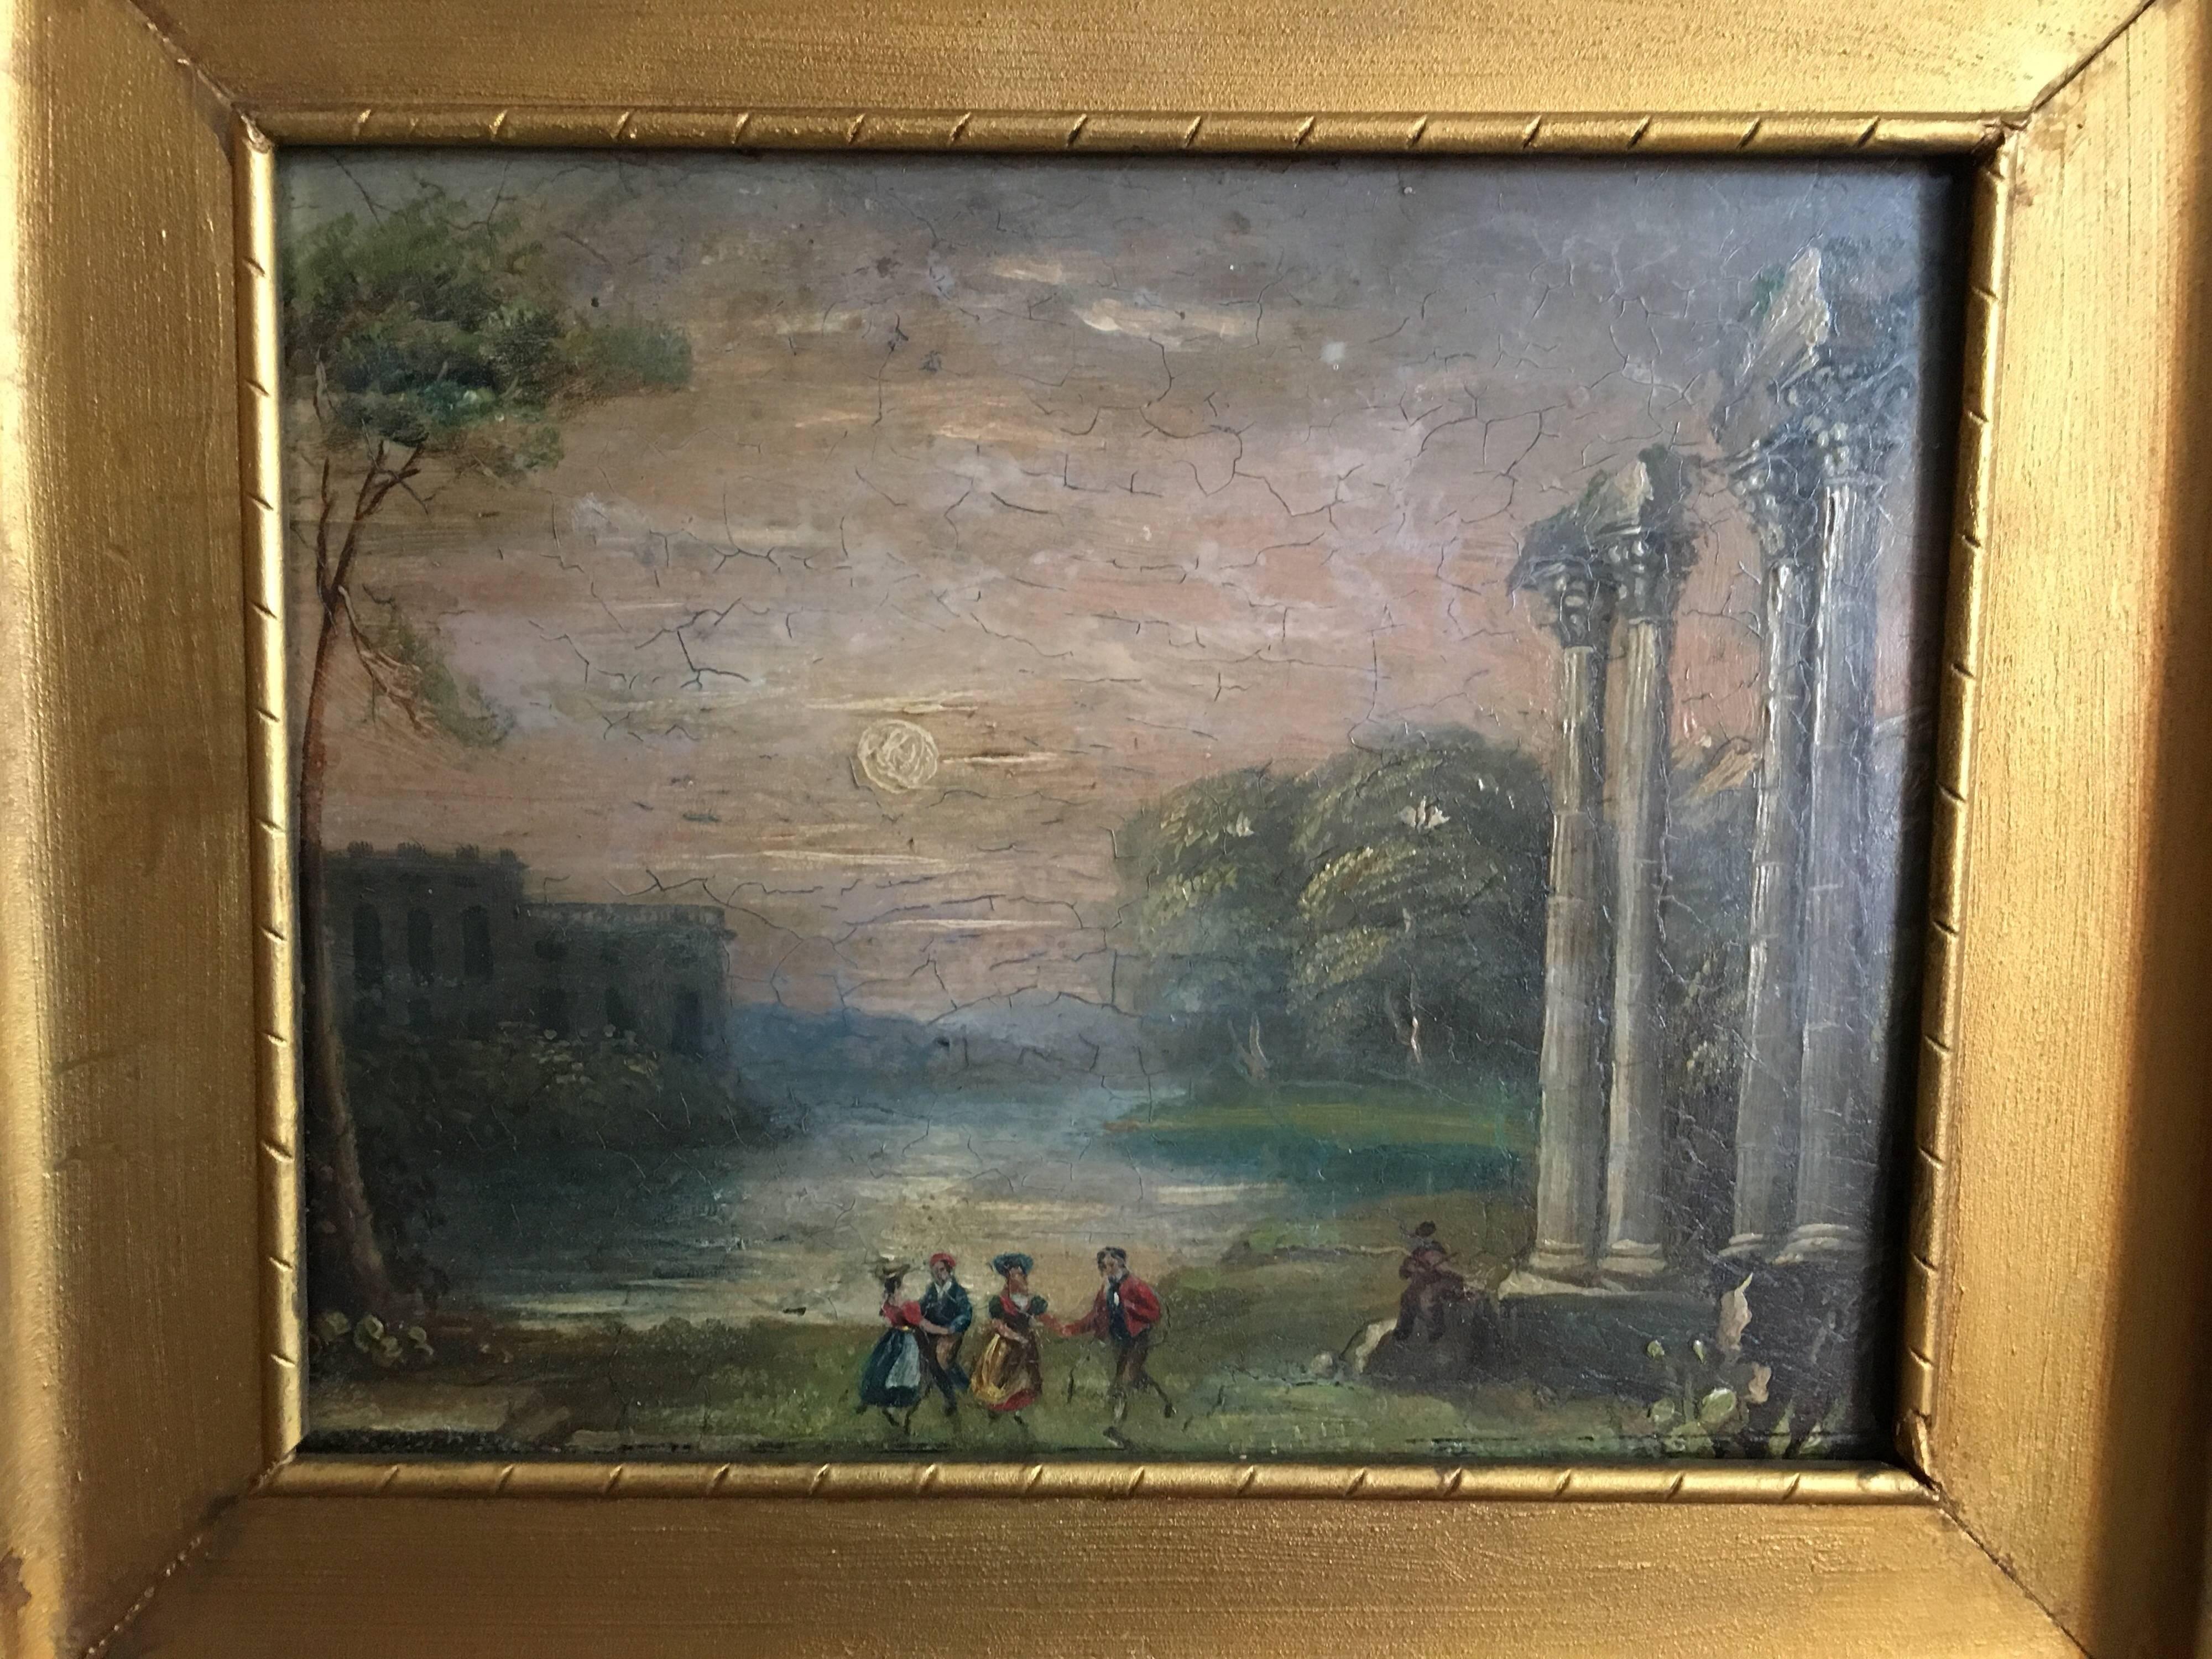 Evening Dance Classical Roman Ruins, Antique Oil - Gray Landscape Painting by Unknown